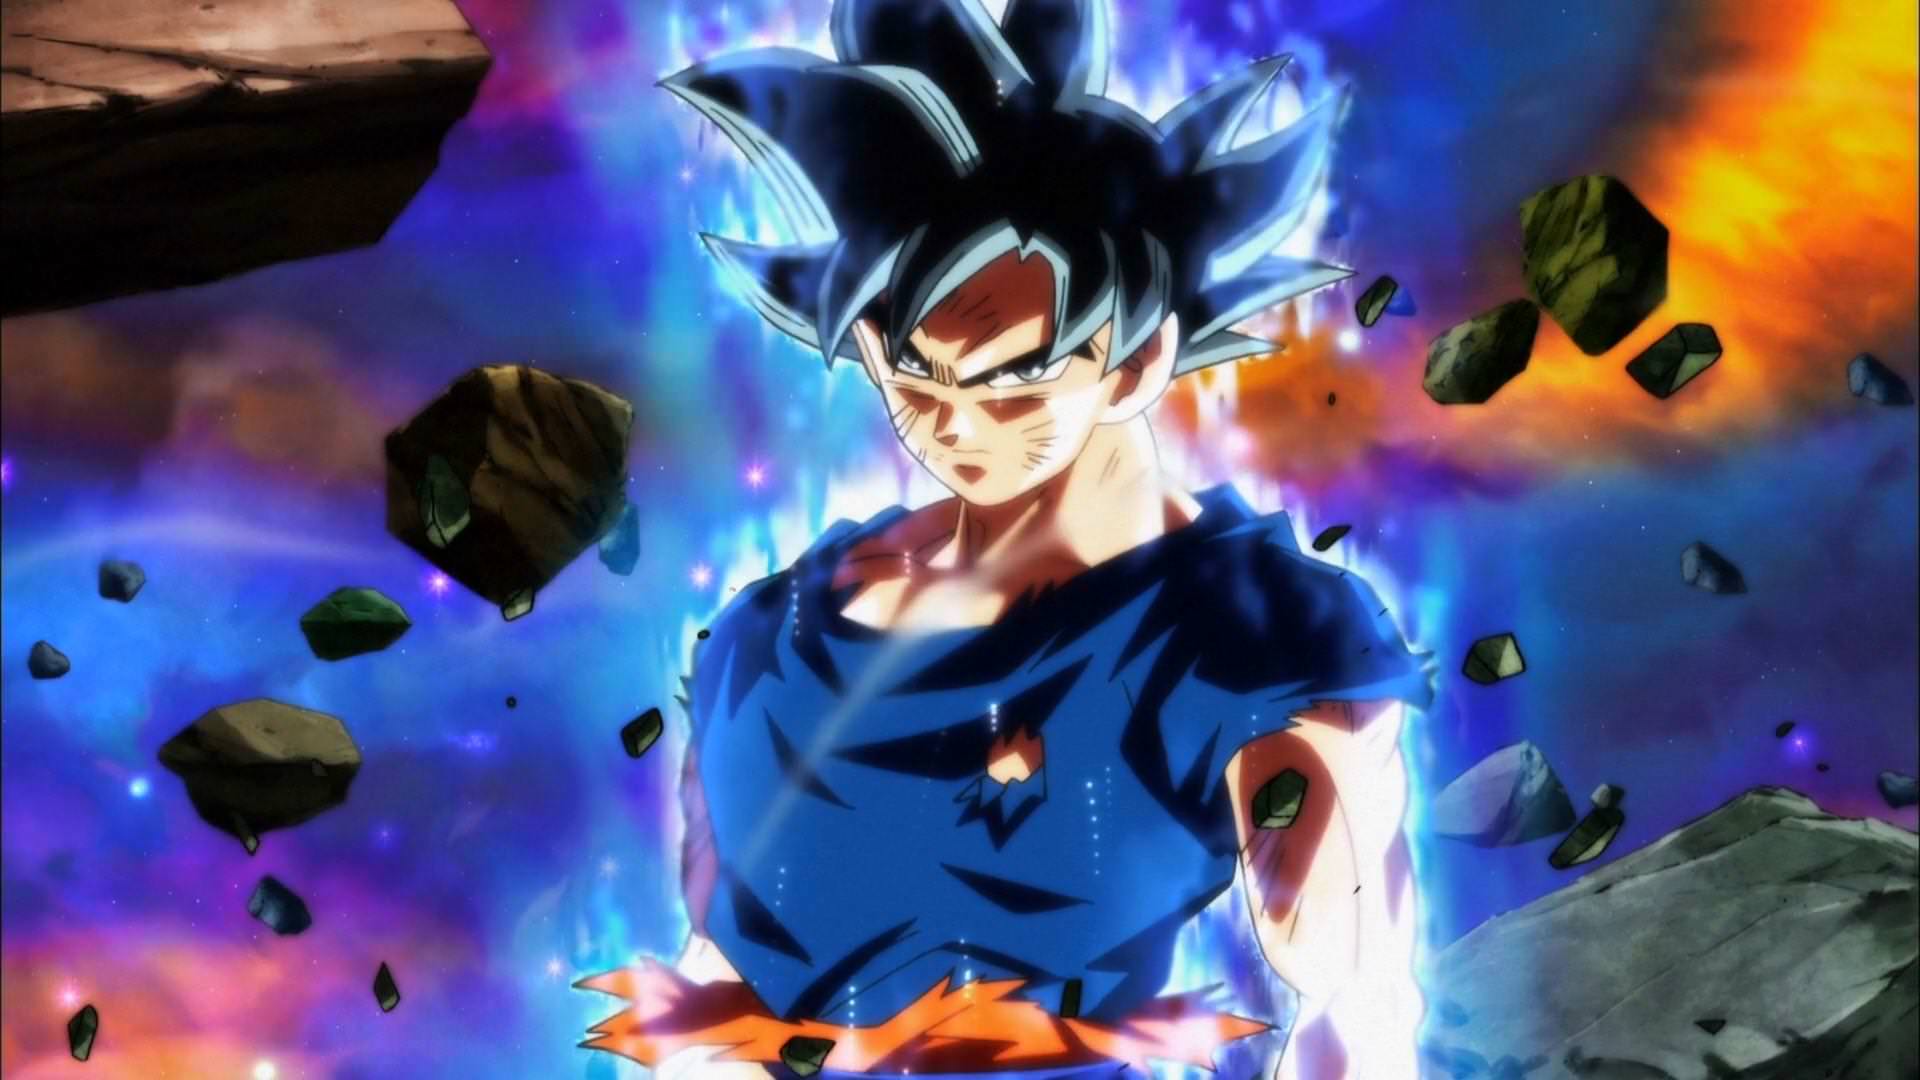 Made a wallpaper of Ultra Instinct Goku for y'all (1920x1080)